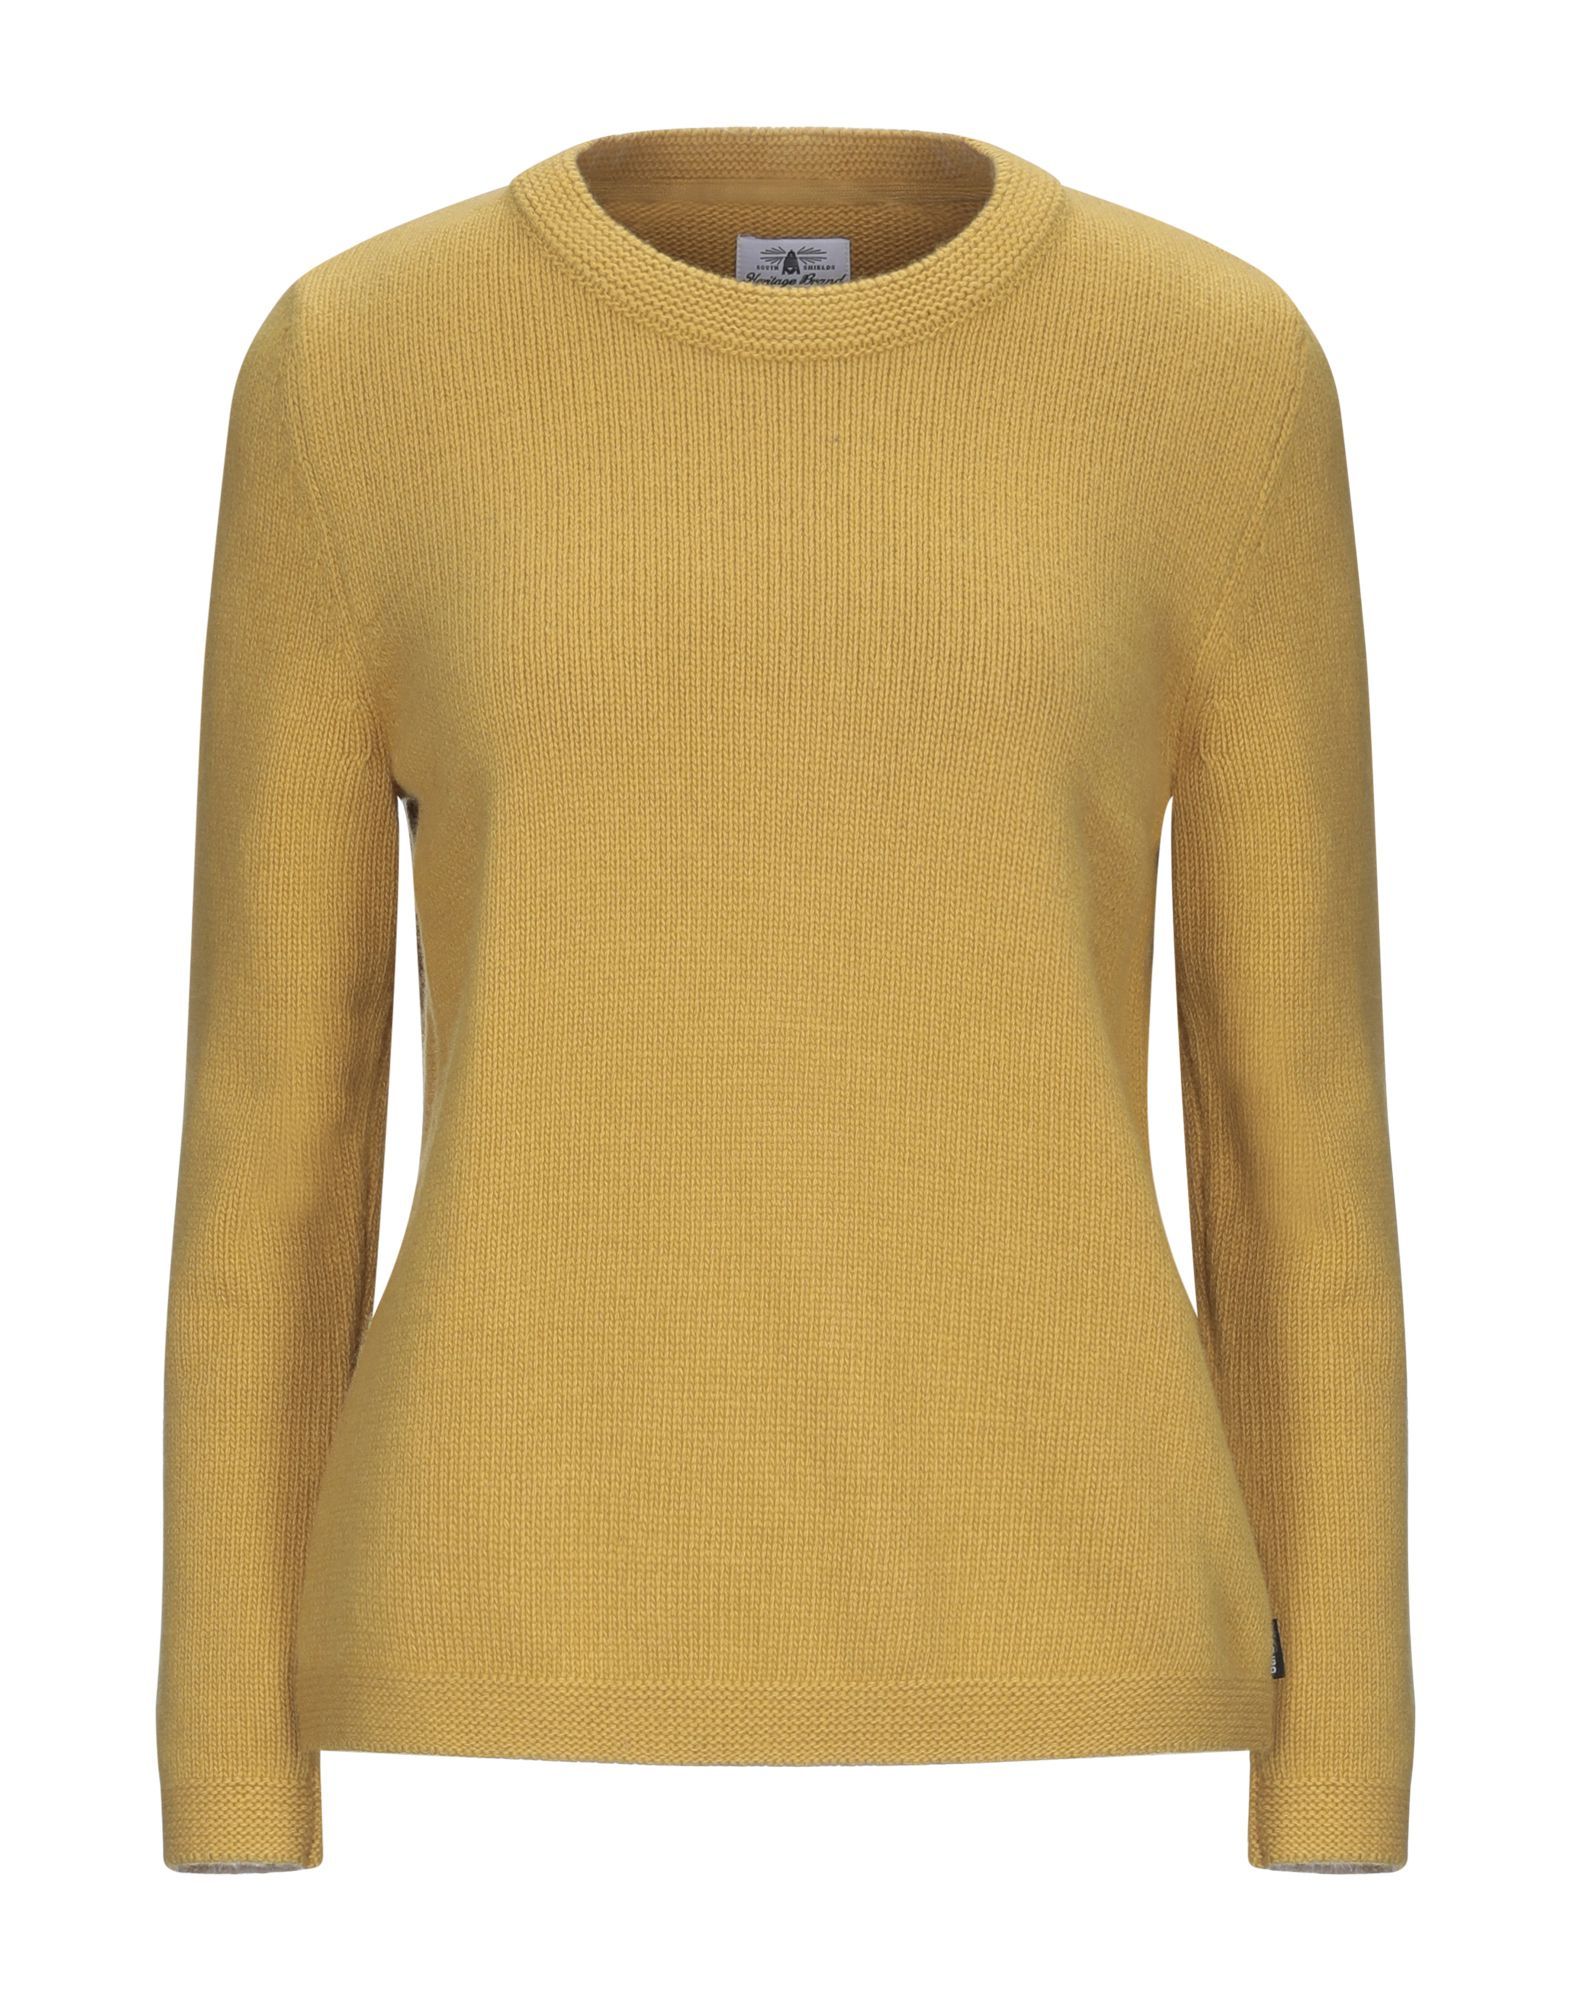 knitted, no appliqués, medium-weight knit, round collar, basic solid colour, long sleeves, no pockets